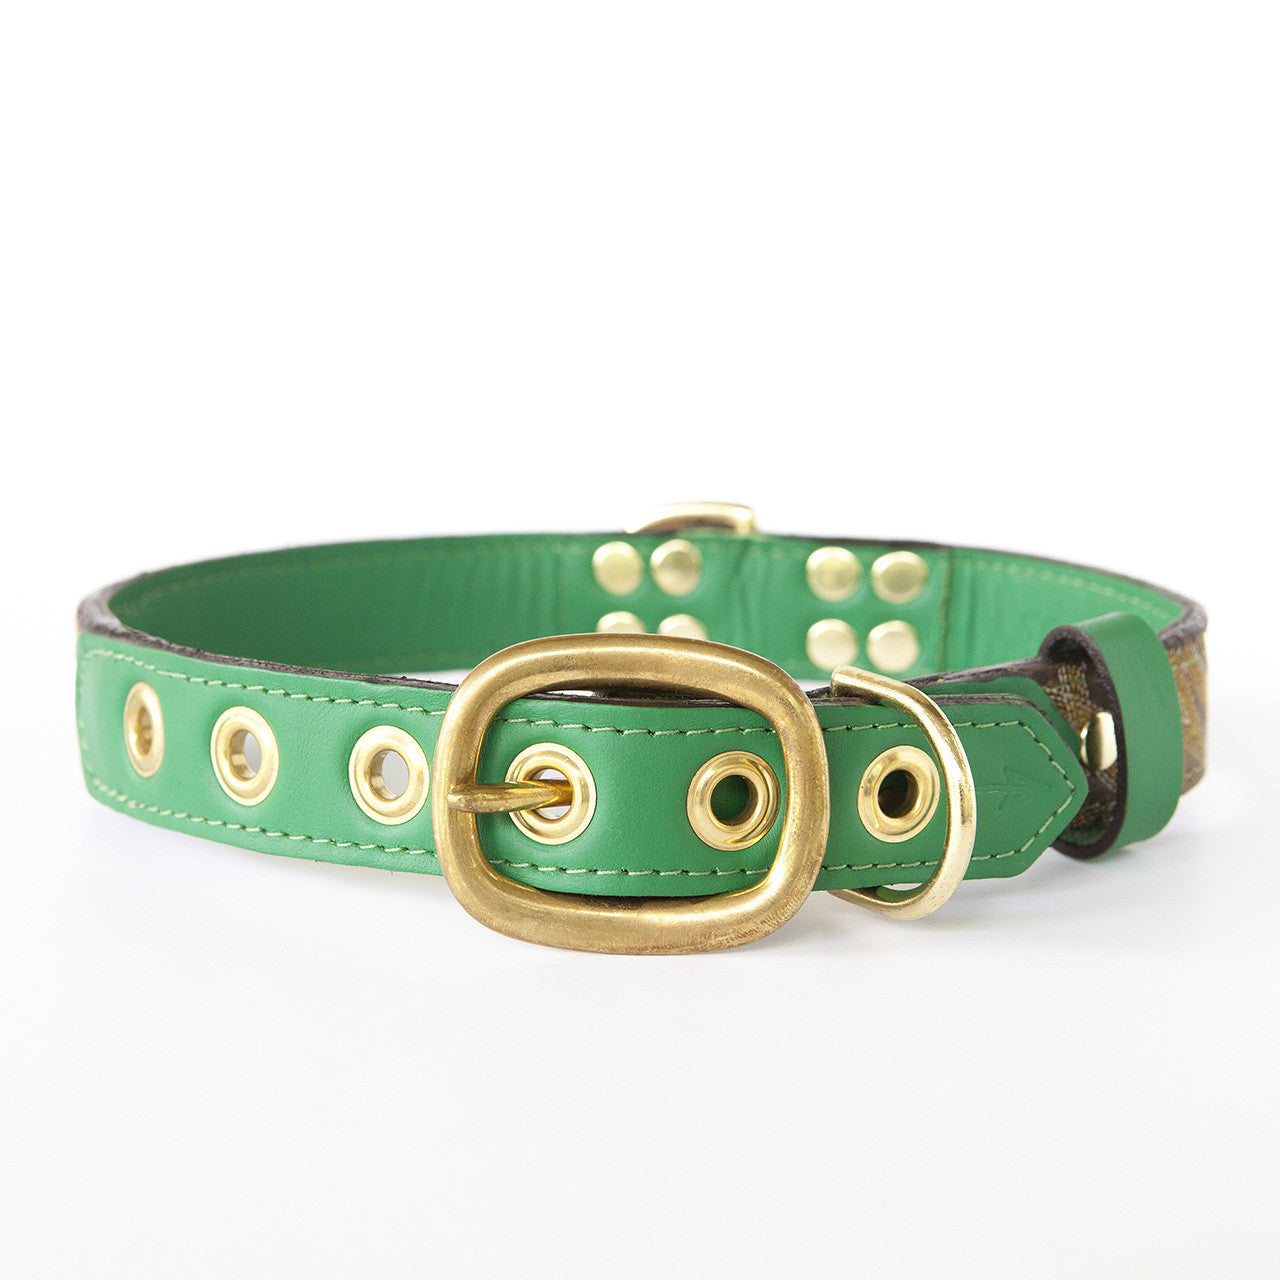 Emerald Green Dog Collar with Dark Brown Leather + Yellow and Tan Stitching (back view)